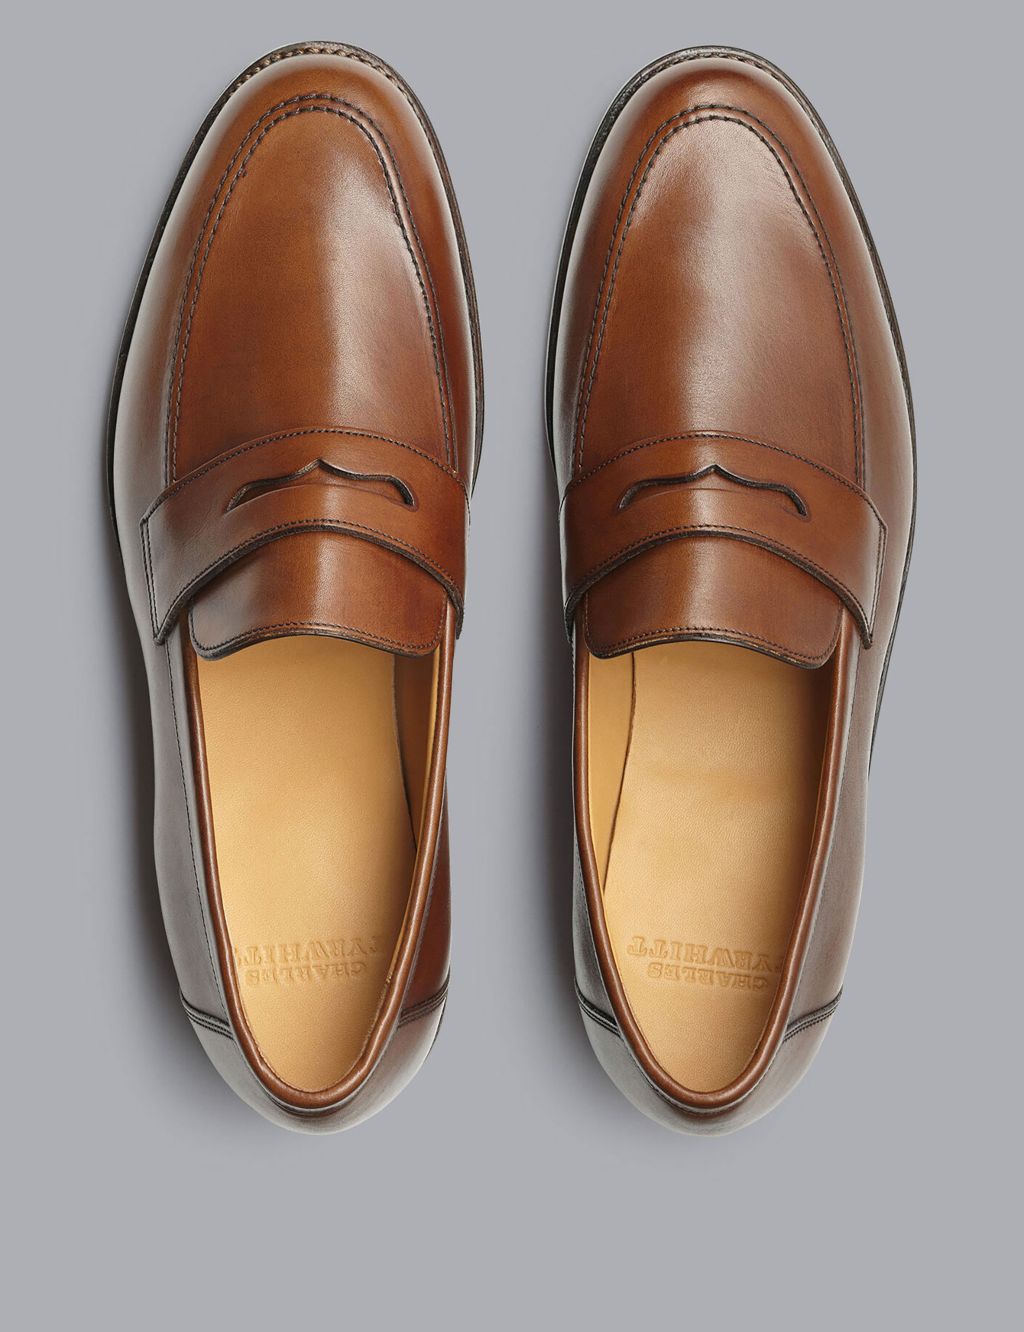 Leather Slip On Loafers image 2